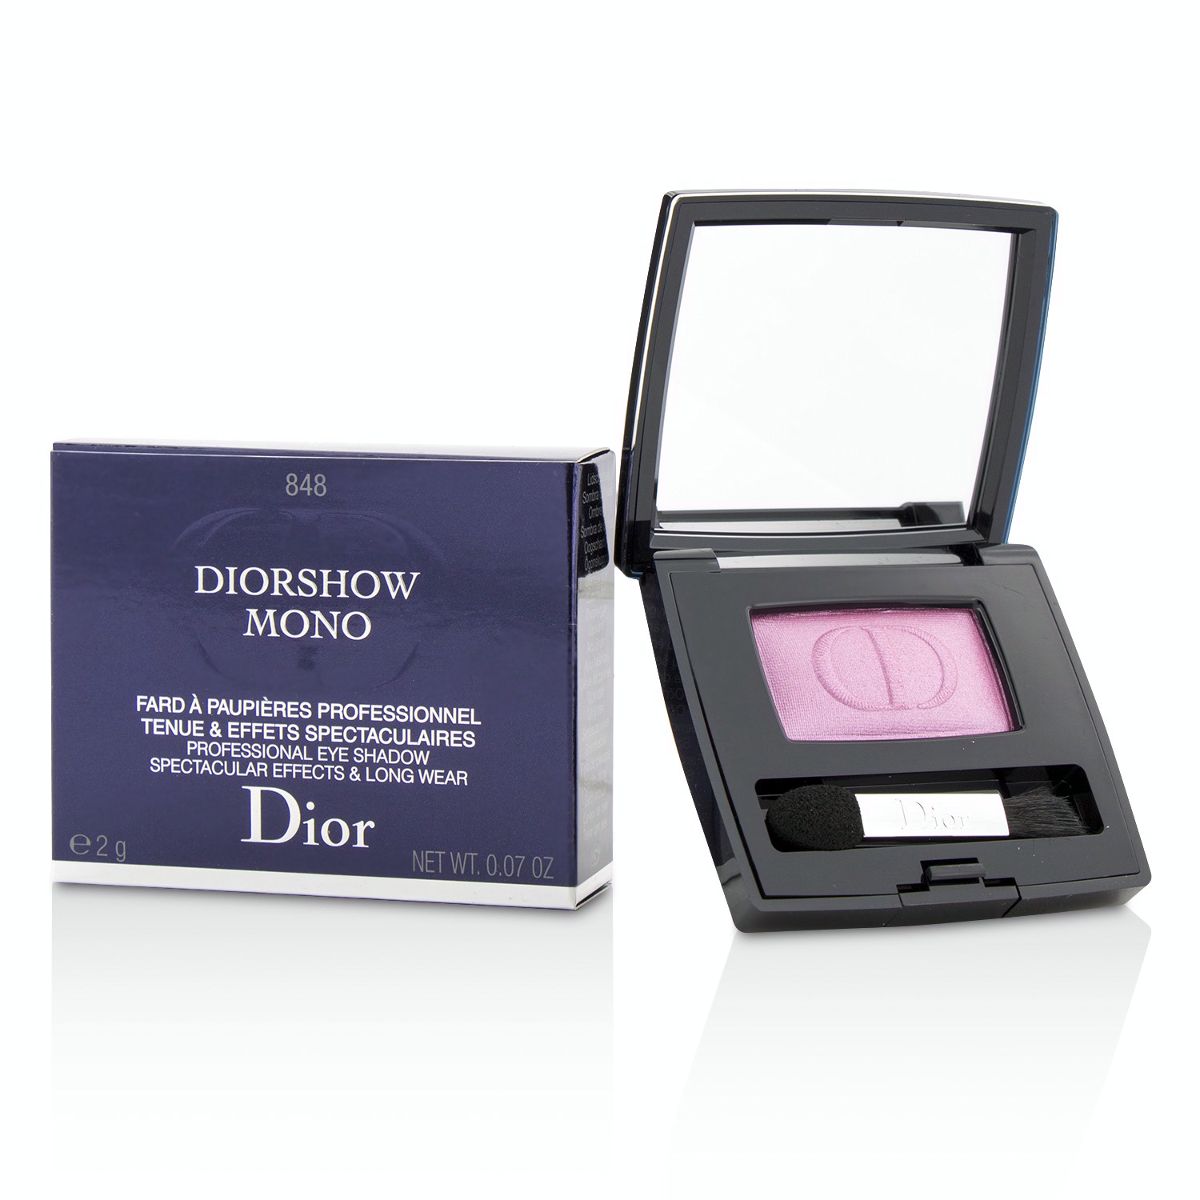 Diorshow Mono Professional Spectacular Effects  Long Wear Eyeshadow - # 848 Focus Christian Dior Image